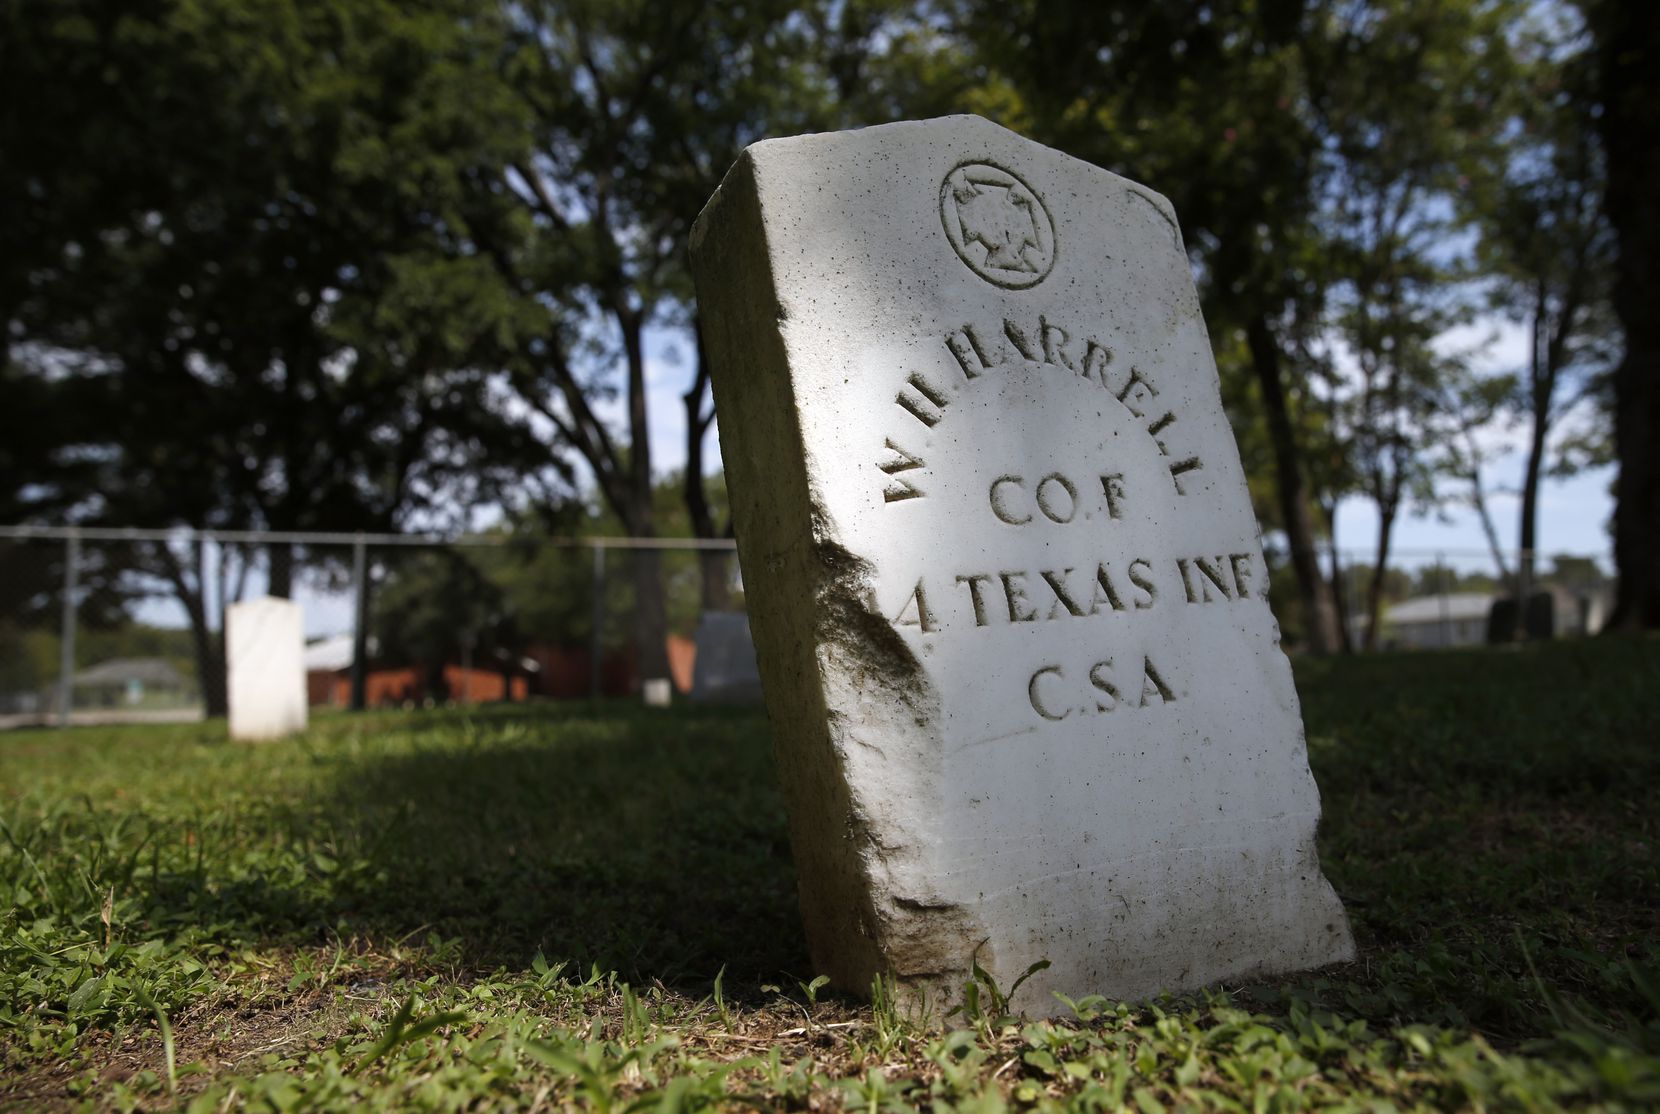 According to historical records, the cemetery holds the remains of about 100 Confederate soldiers and some of their family members. Some headstones list birth dates as far back as the 1820s.